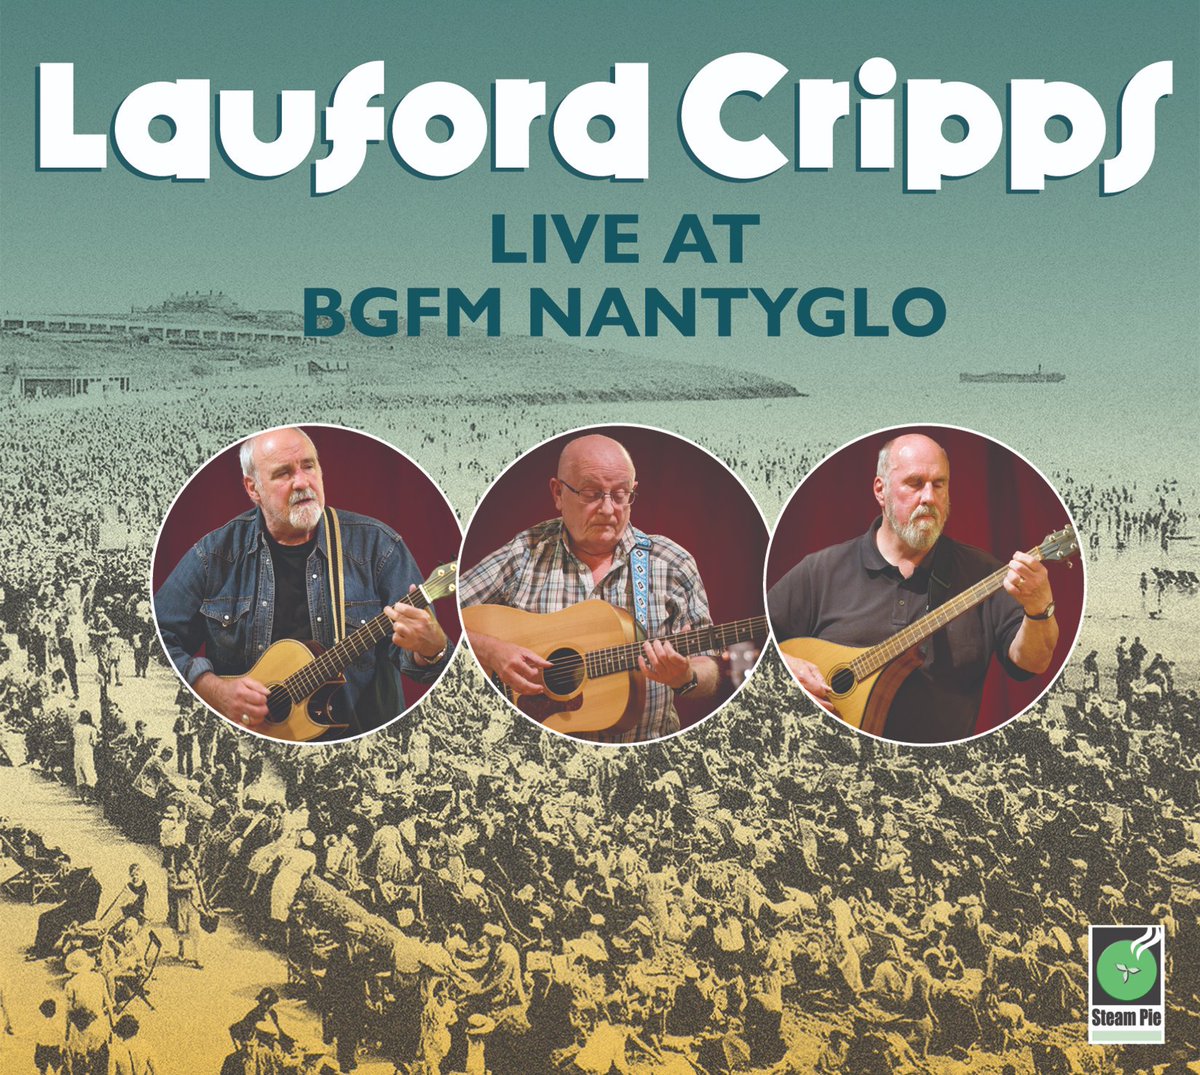 The first album release on Steam Pie Records since 2016. Take a listen to the Lauford Cripps album 'Live at BGFM Nantyglo' by following the link below Maybe an RT @martyn_joseph @msimpsonian @breabach ??